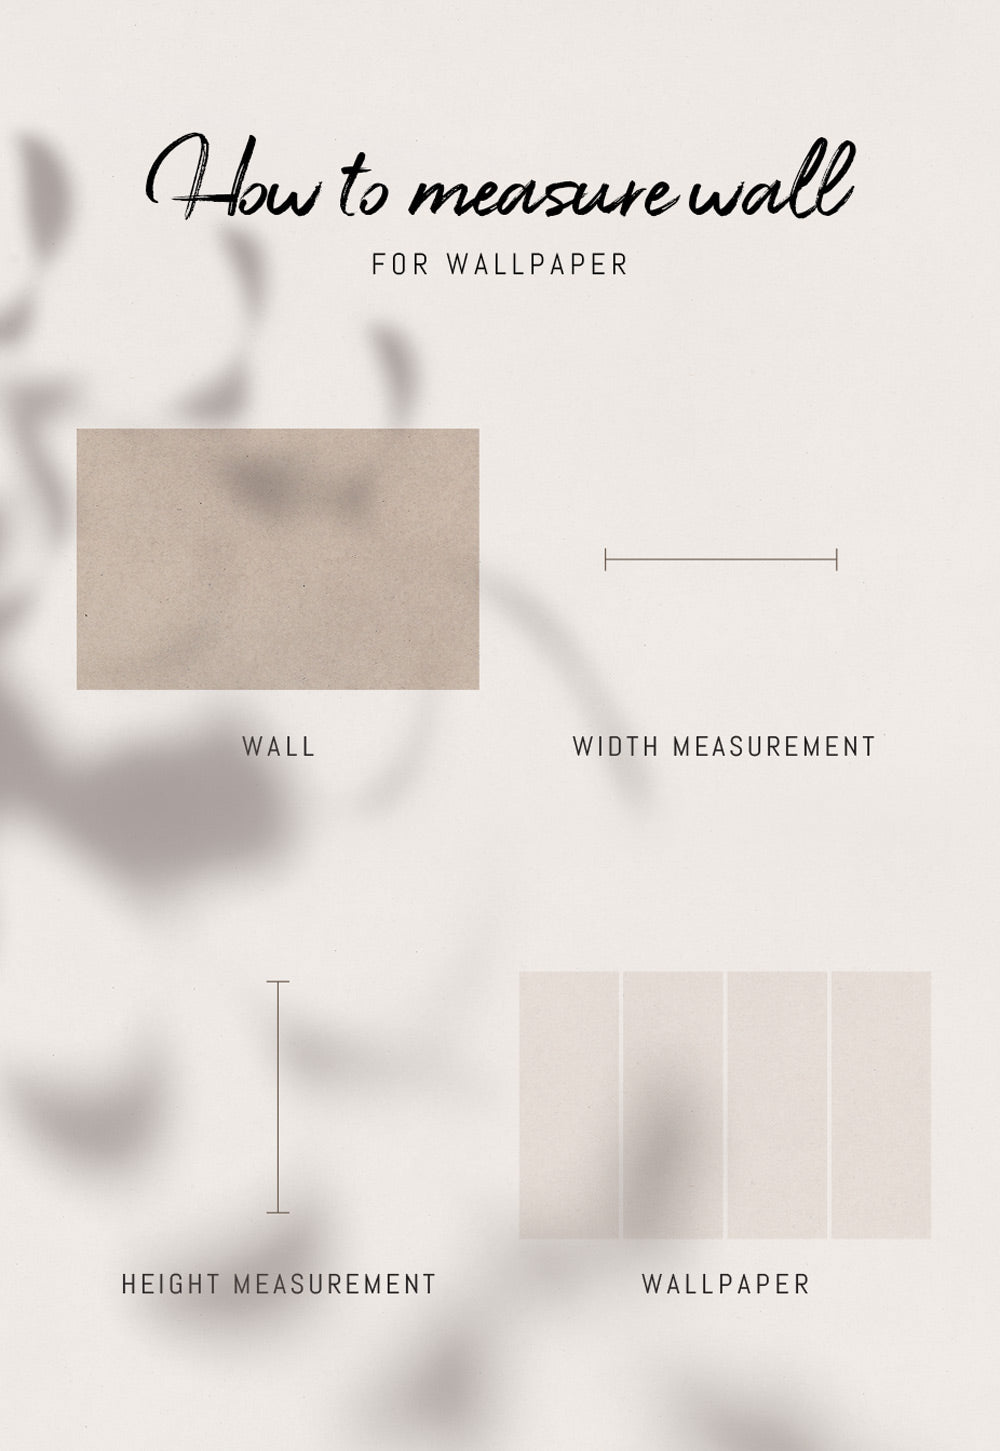 Measuring a wall for wallpaper